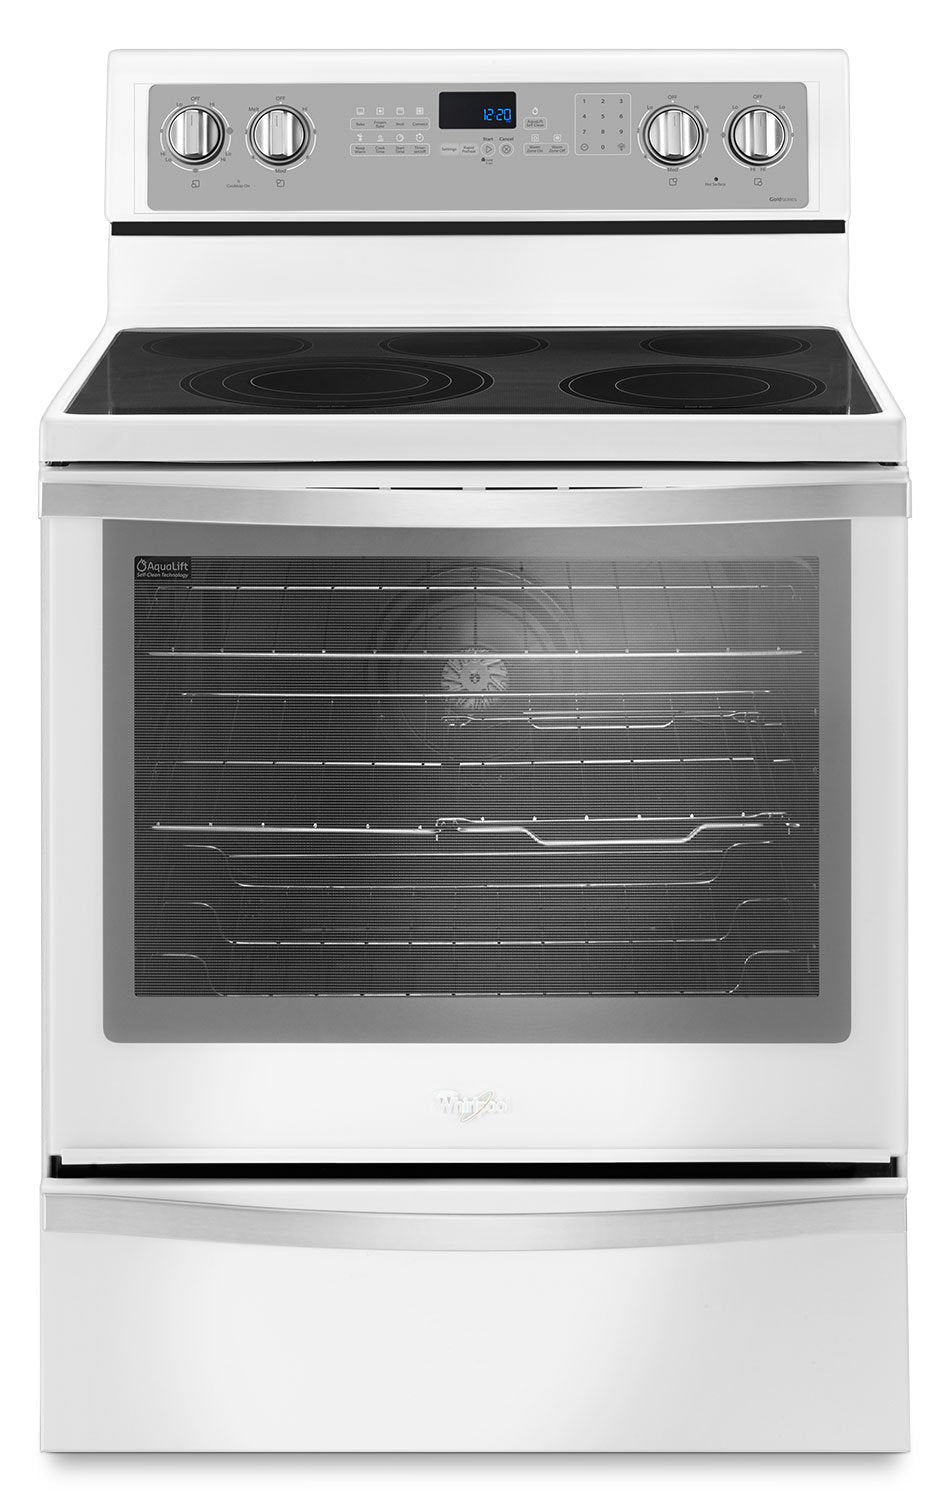 Whirlpool 6.4 Cu. Ft. Freestanding Electric Range with True Convection - YWFE745